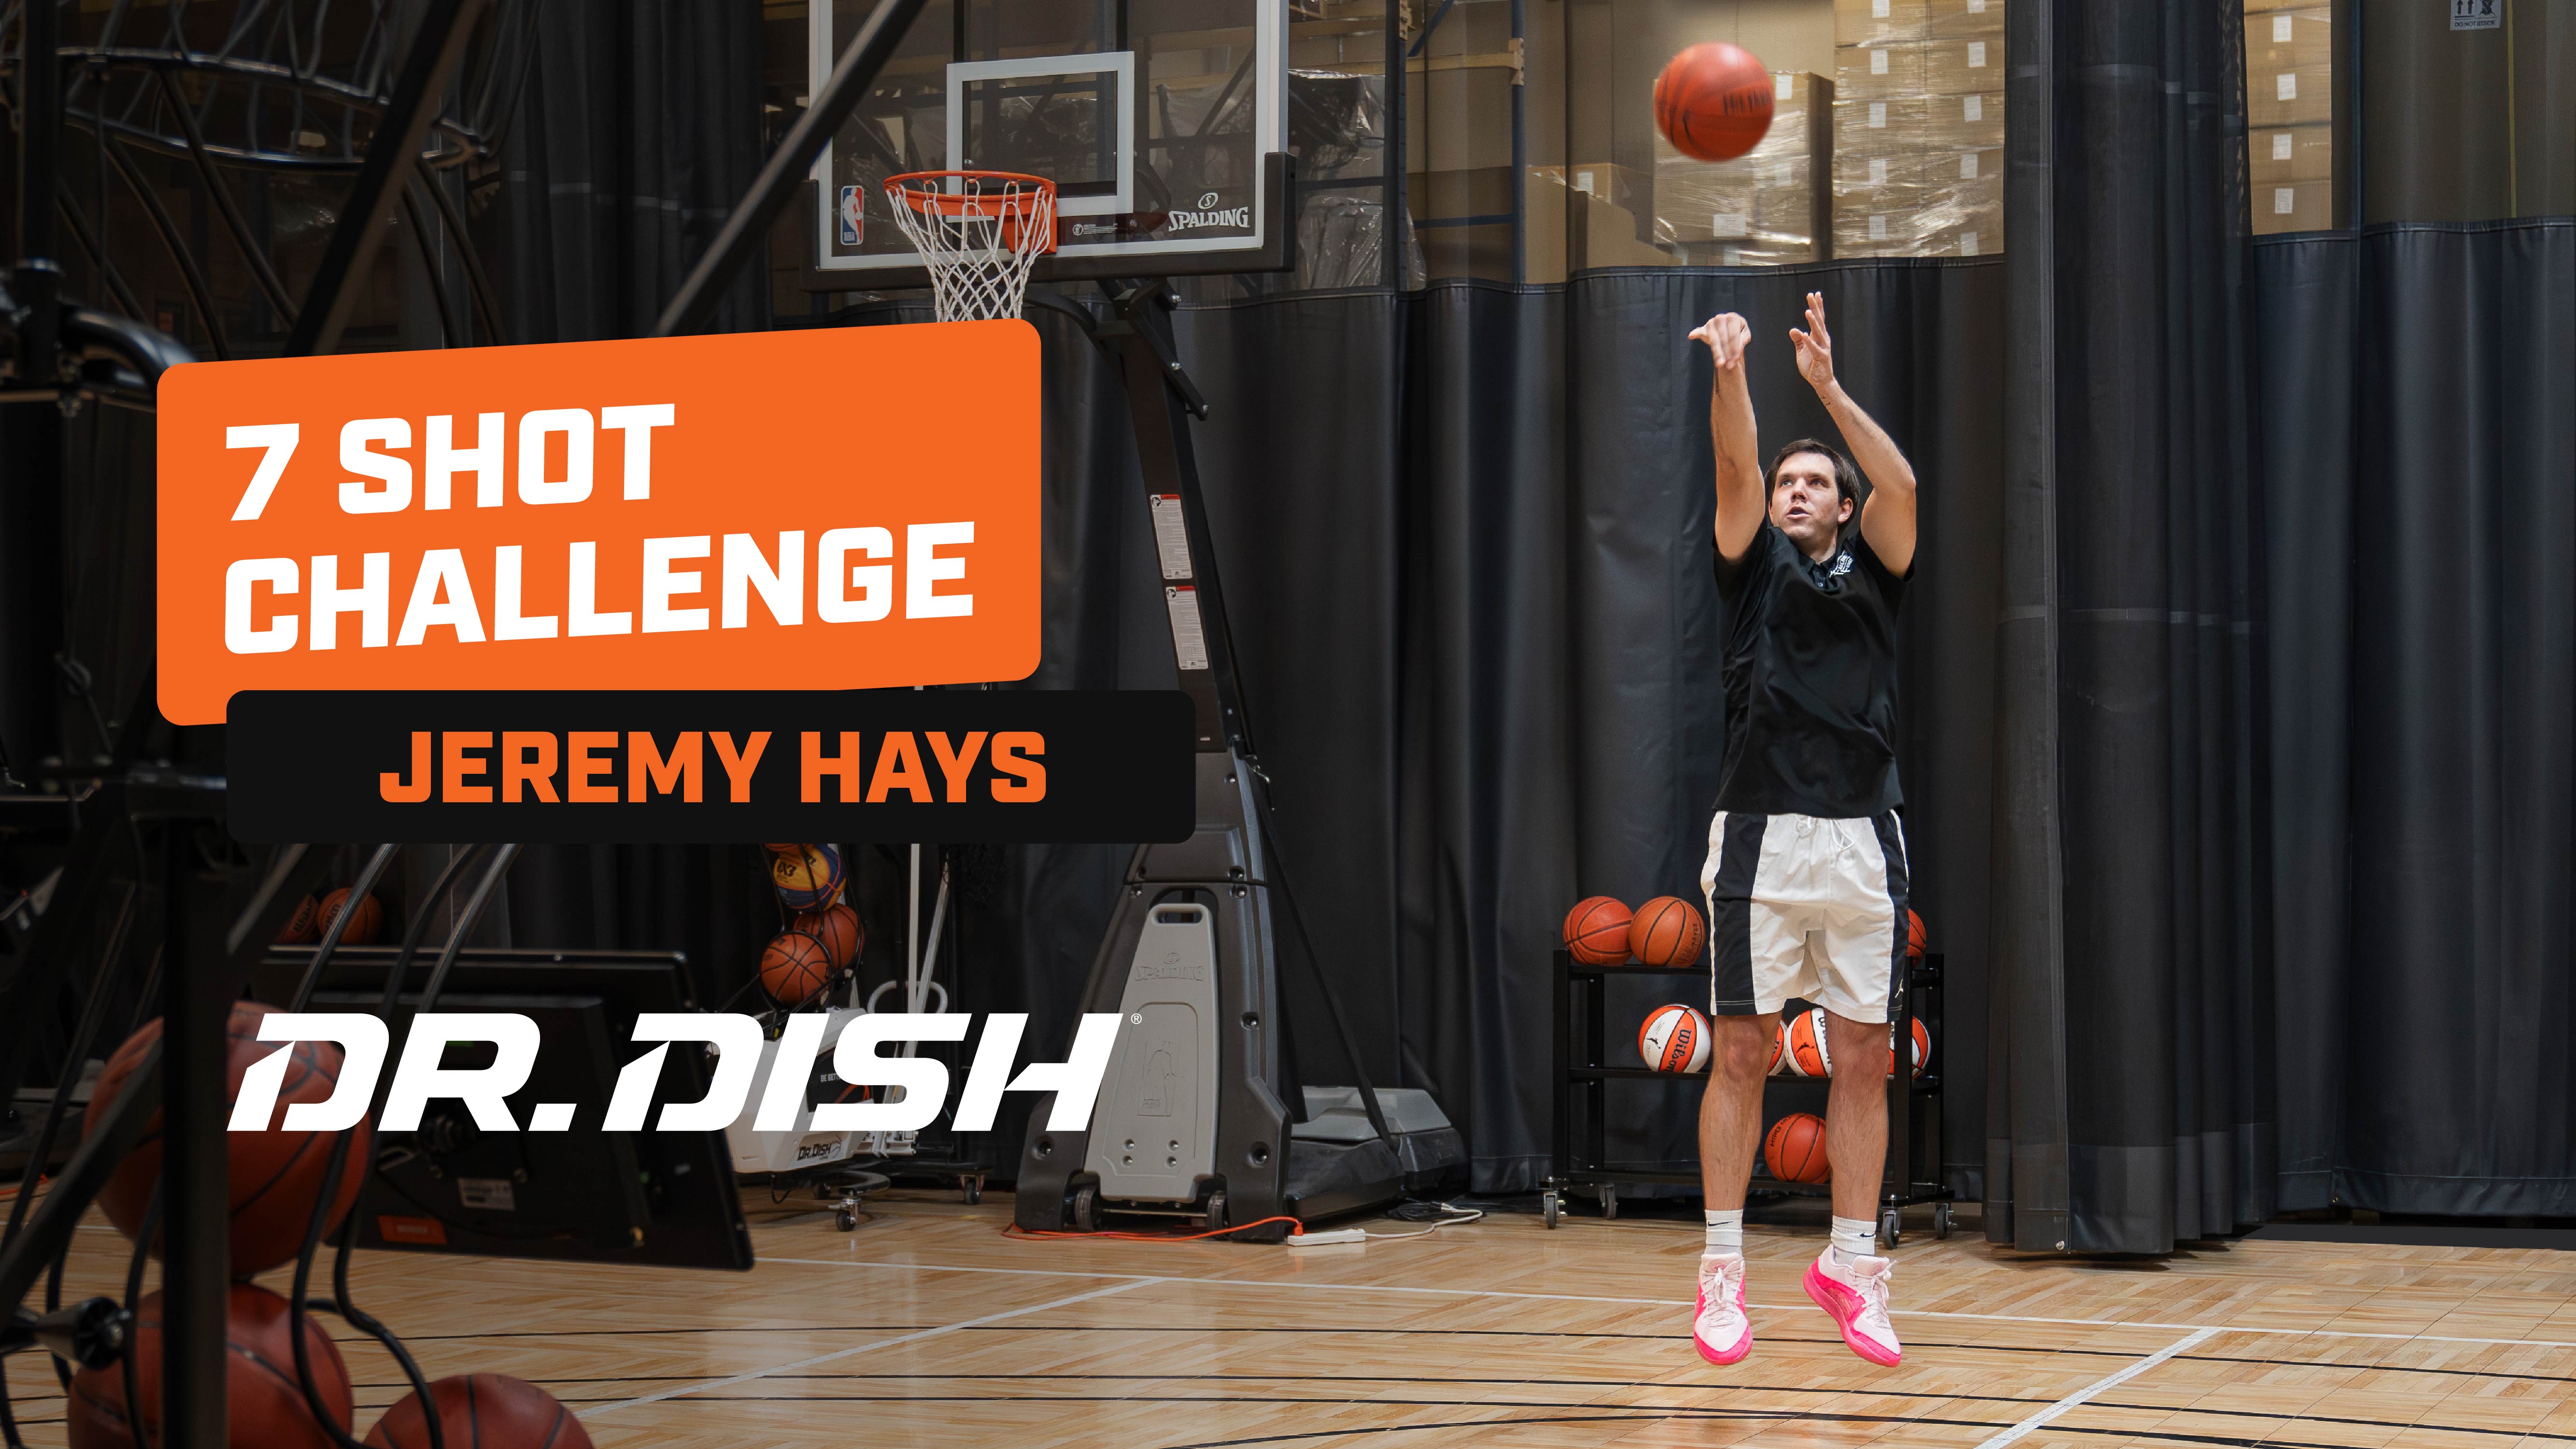 7 Shot Shooting Challenge with Jeremy Hays